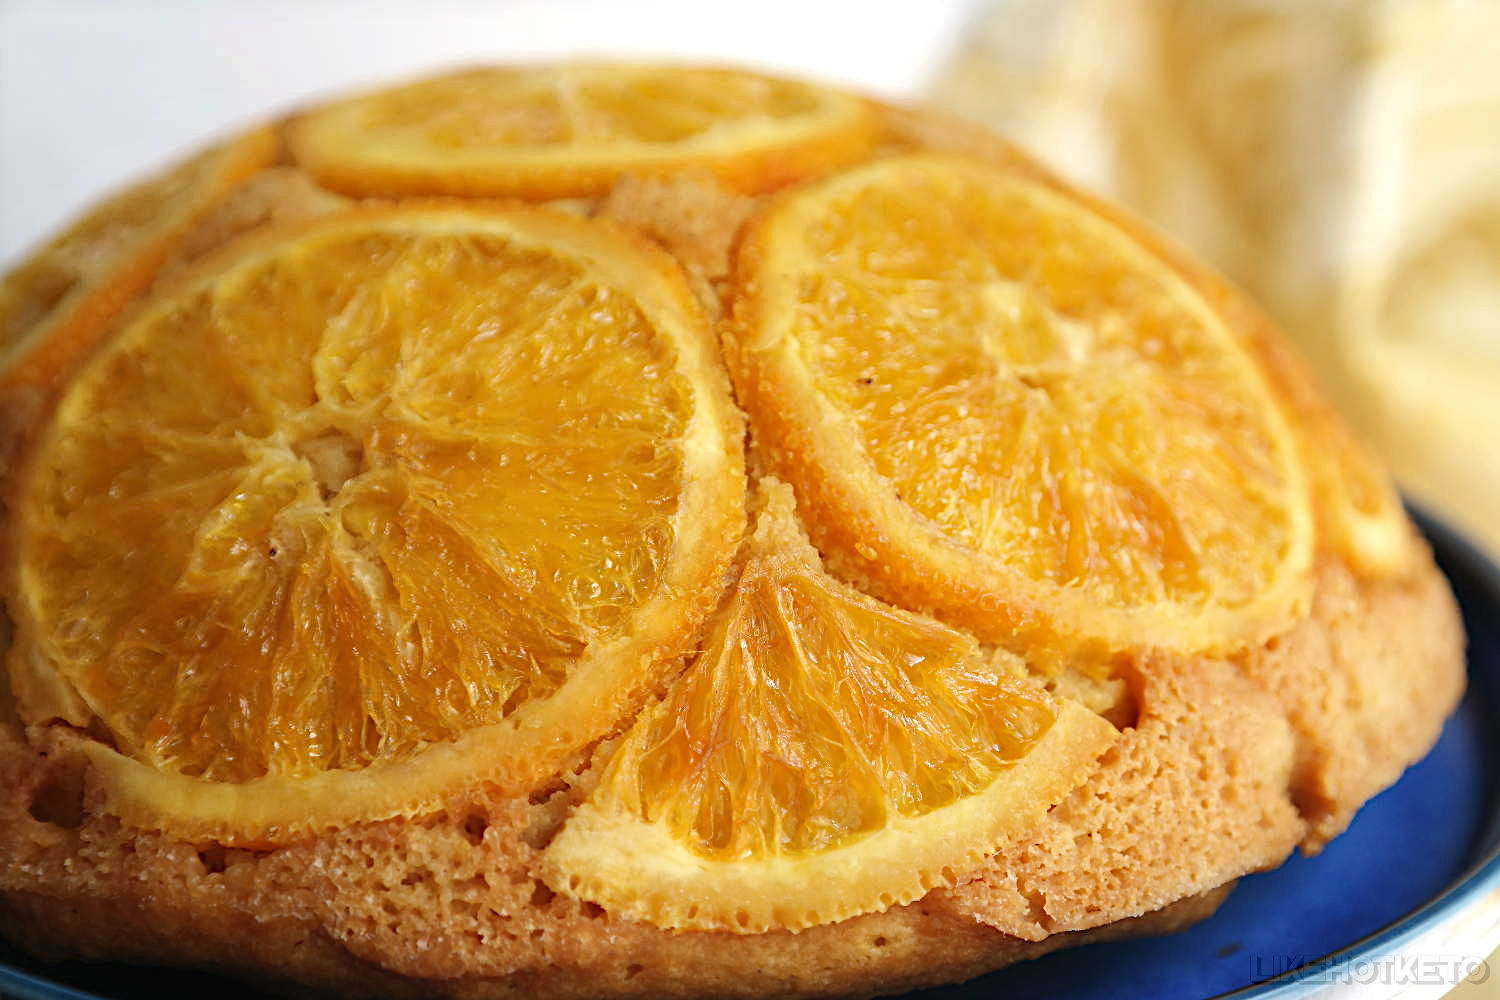 A beautiful smiling fluffy hemisphere shaped cake, covered in golden orange slices.